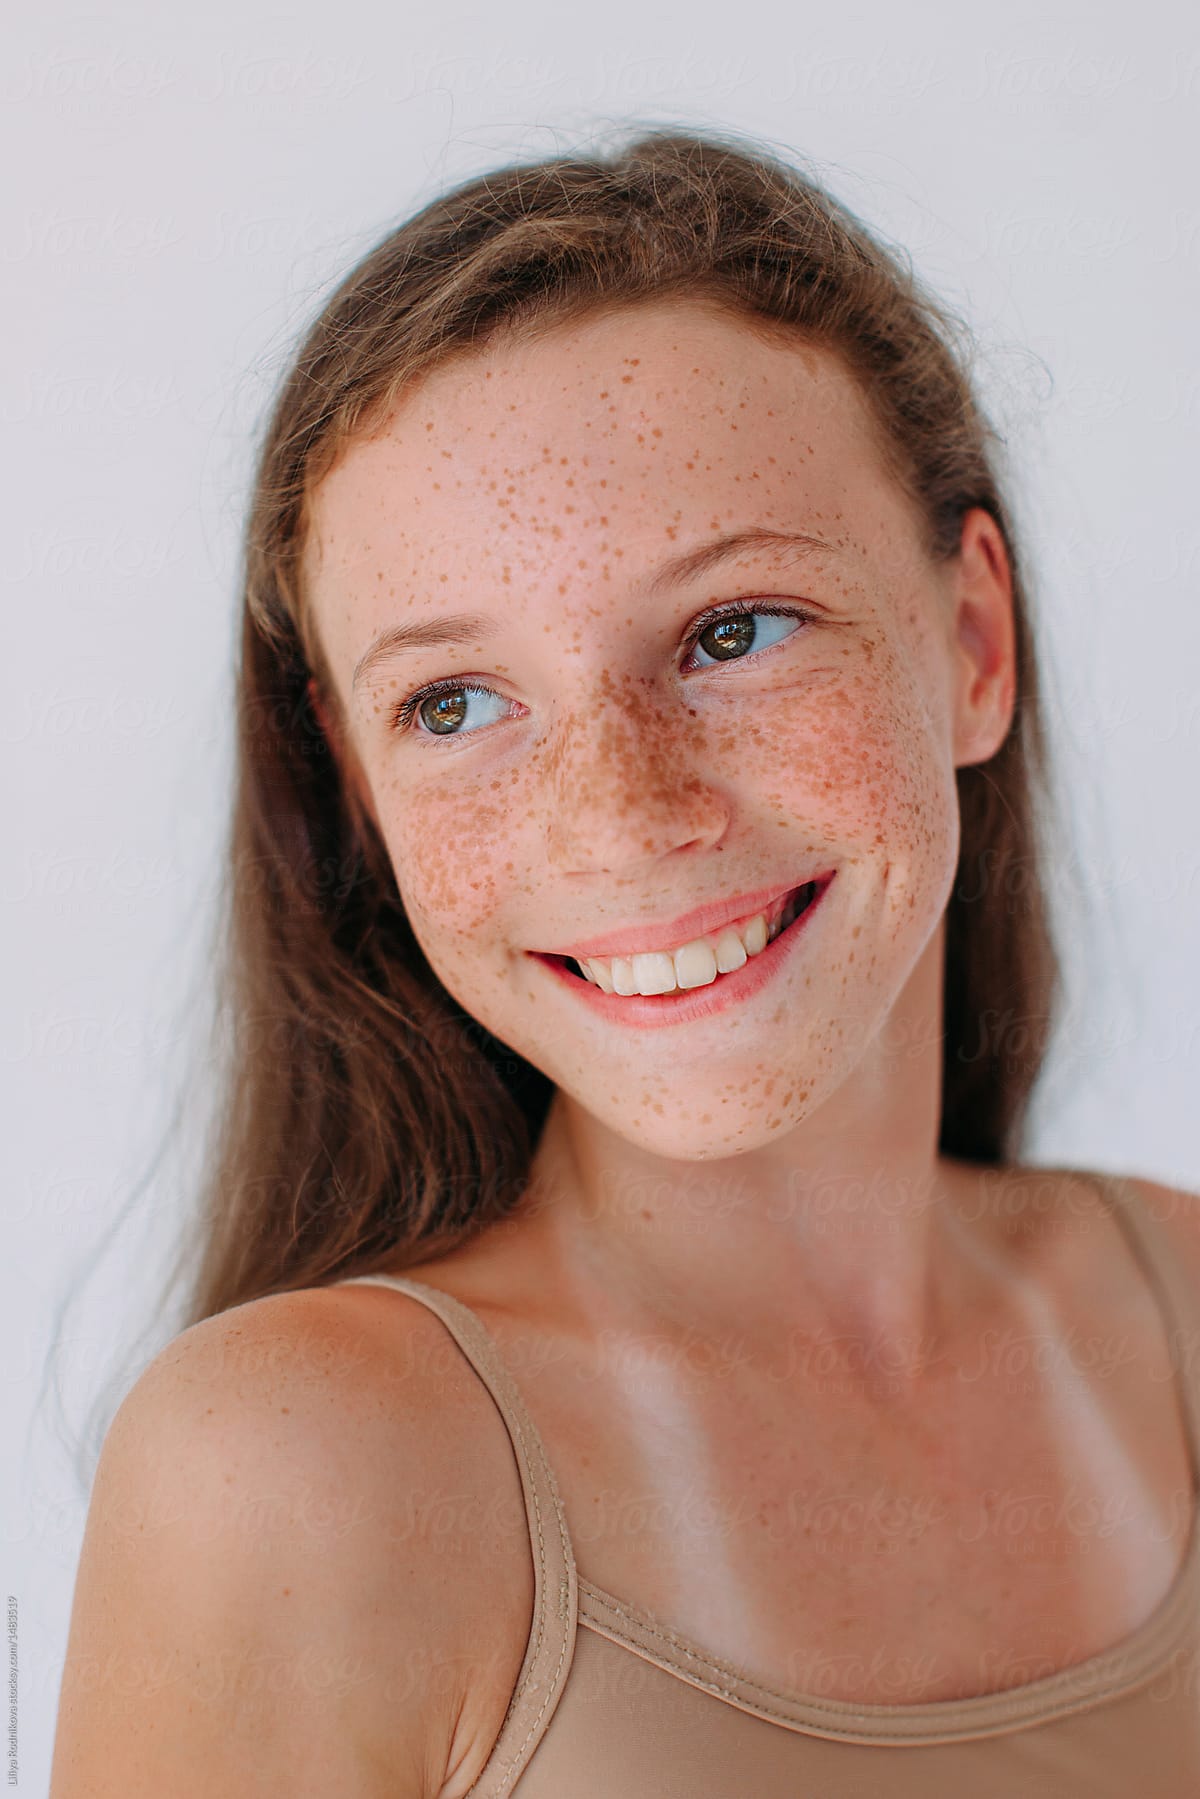 Beauty Portrait Of Attractive Smiling Girl With Freckles And Long Hair By Liliya Rodnikova